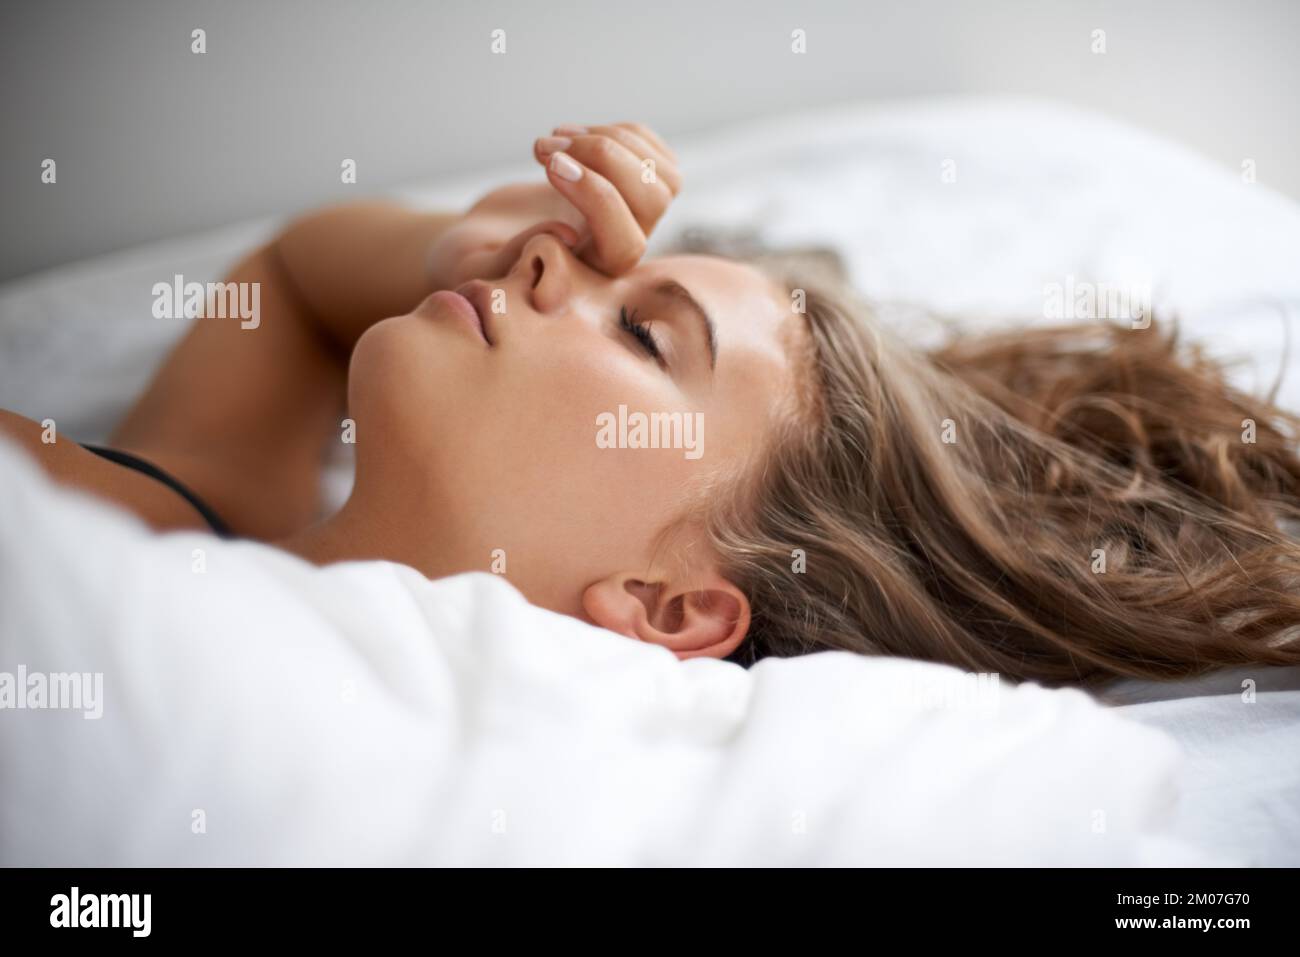 Lost in her dreams. A beautiful young woman sleeping peacefully. Stock Photo